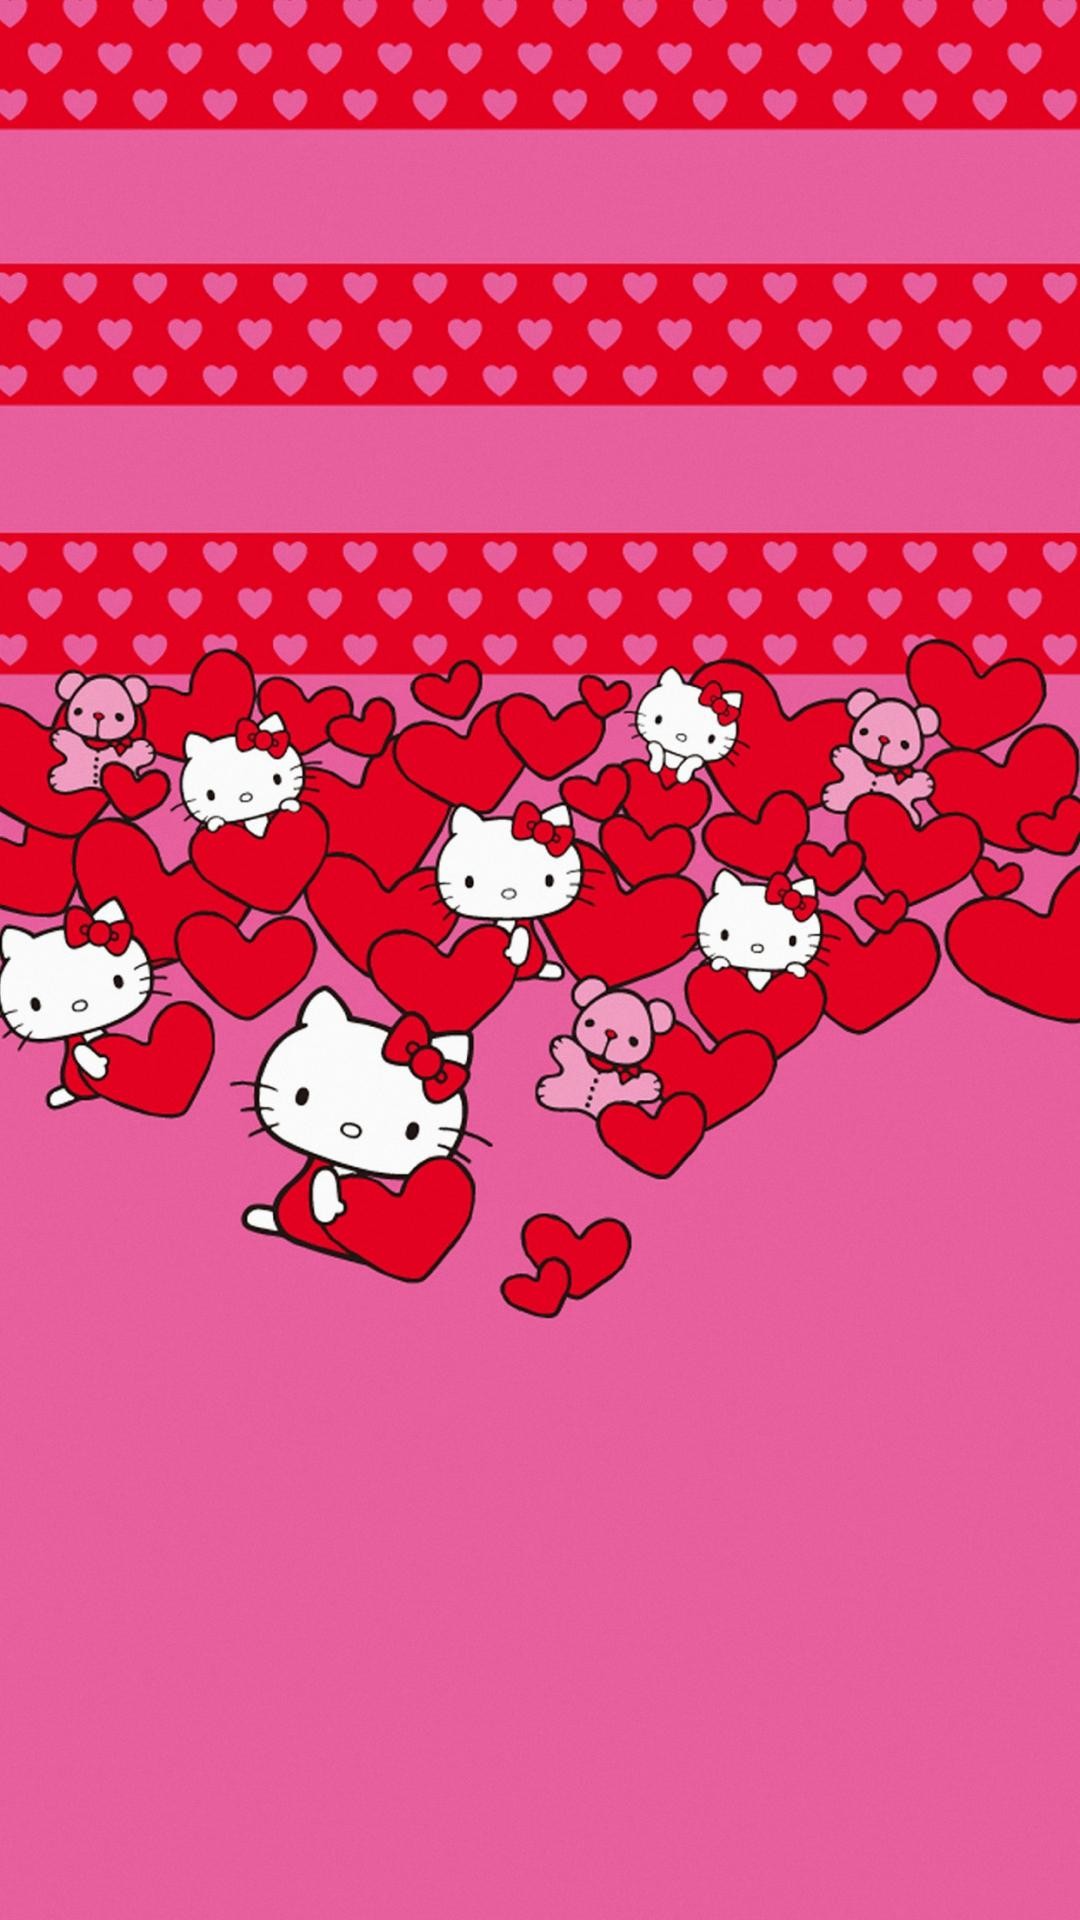 1080x1920 4. hello-kitty-wallpaper-for-android-HD5-338x600